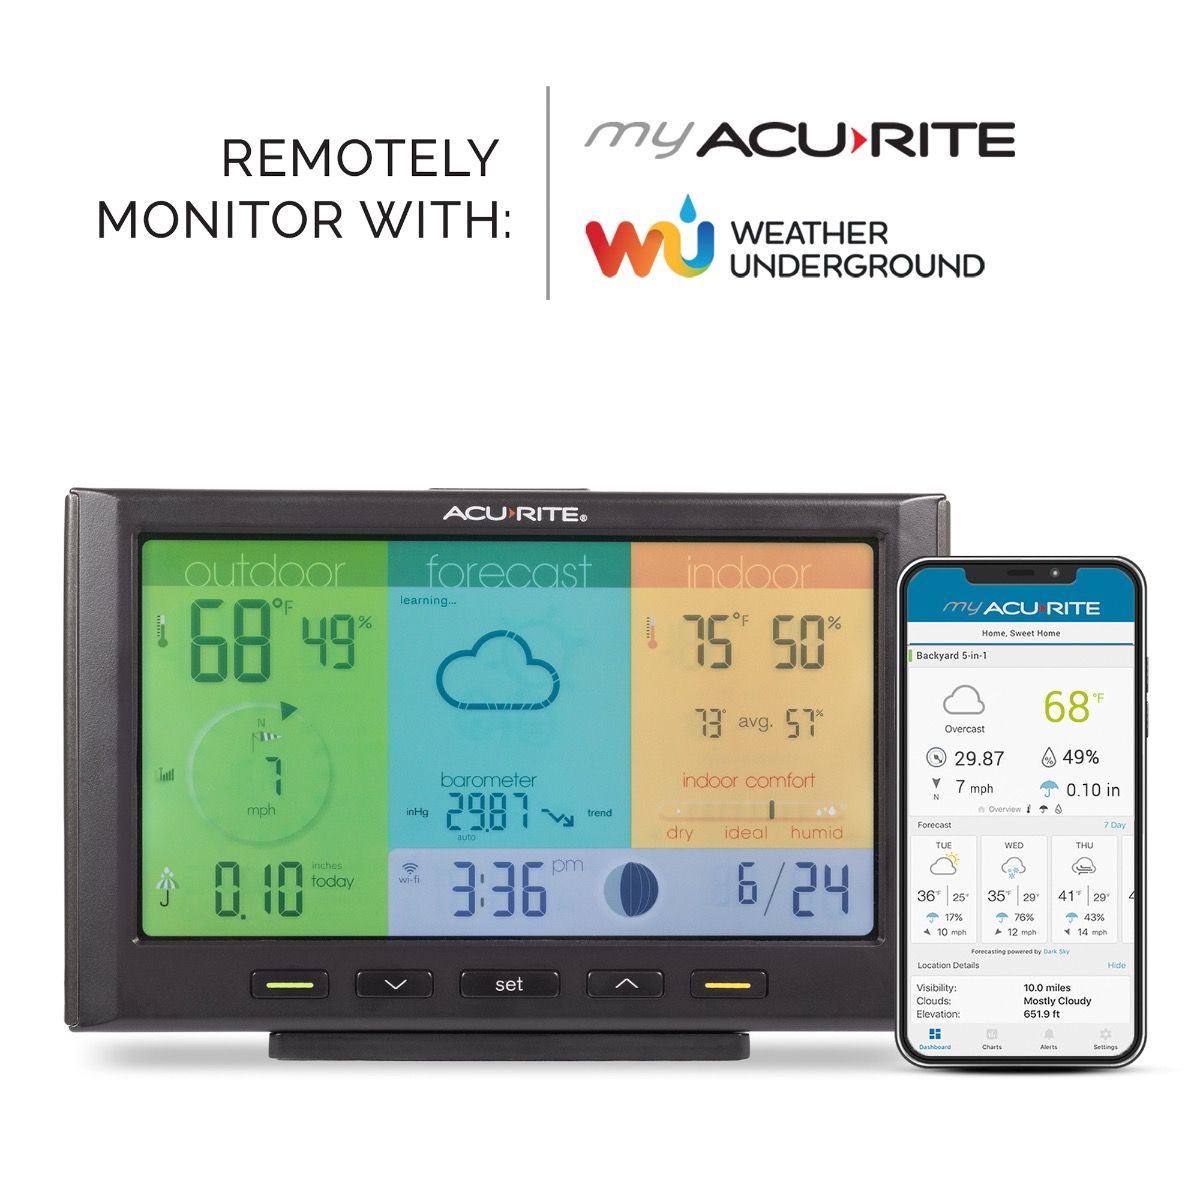 Acurite Iris Weather Station with Color Display - White